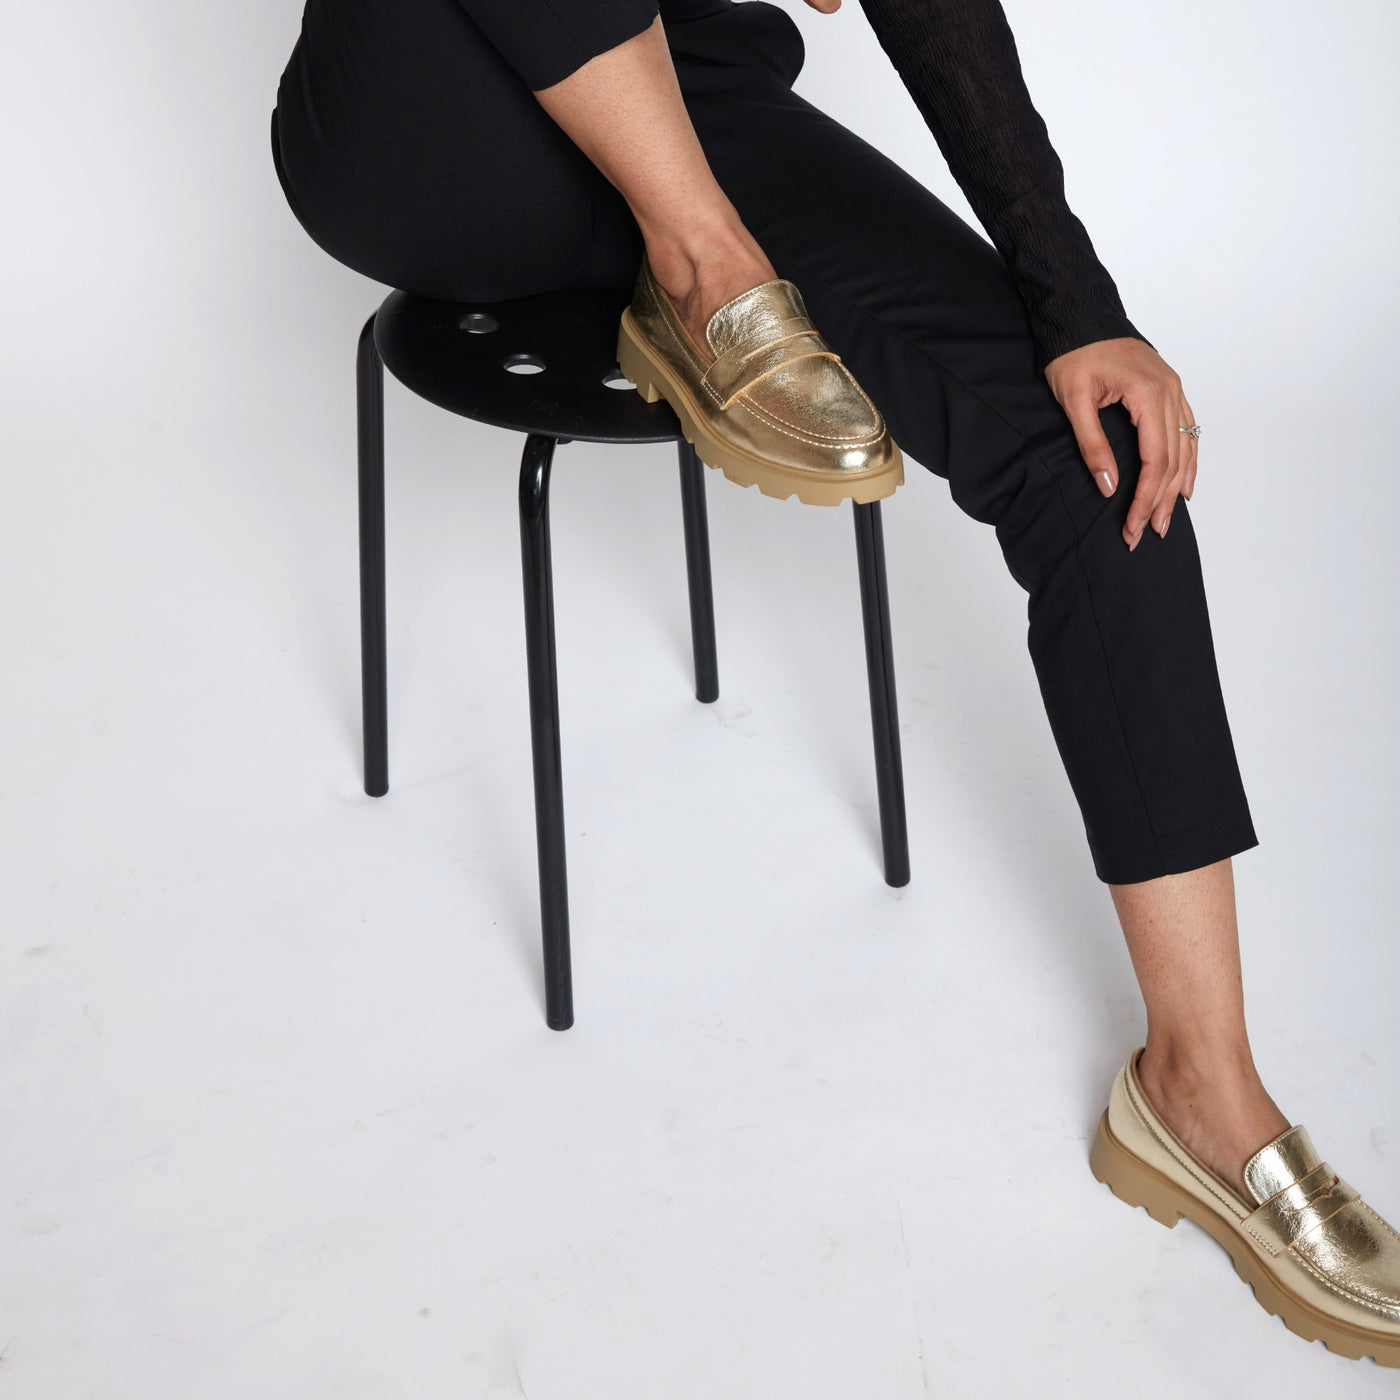 Gold Metallic Loafers